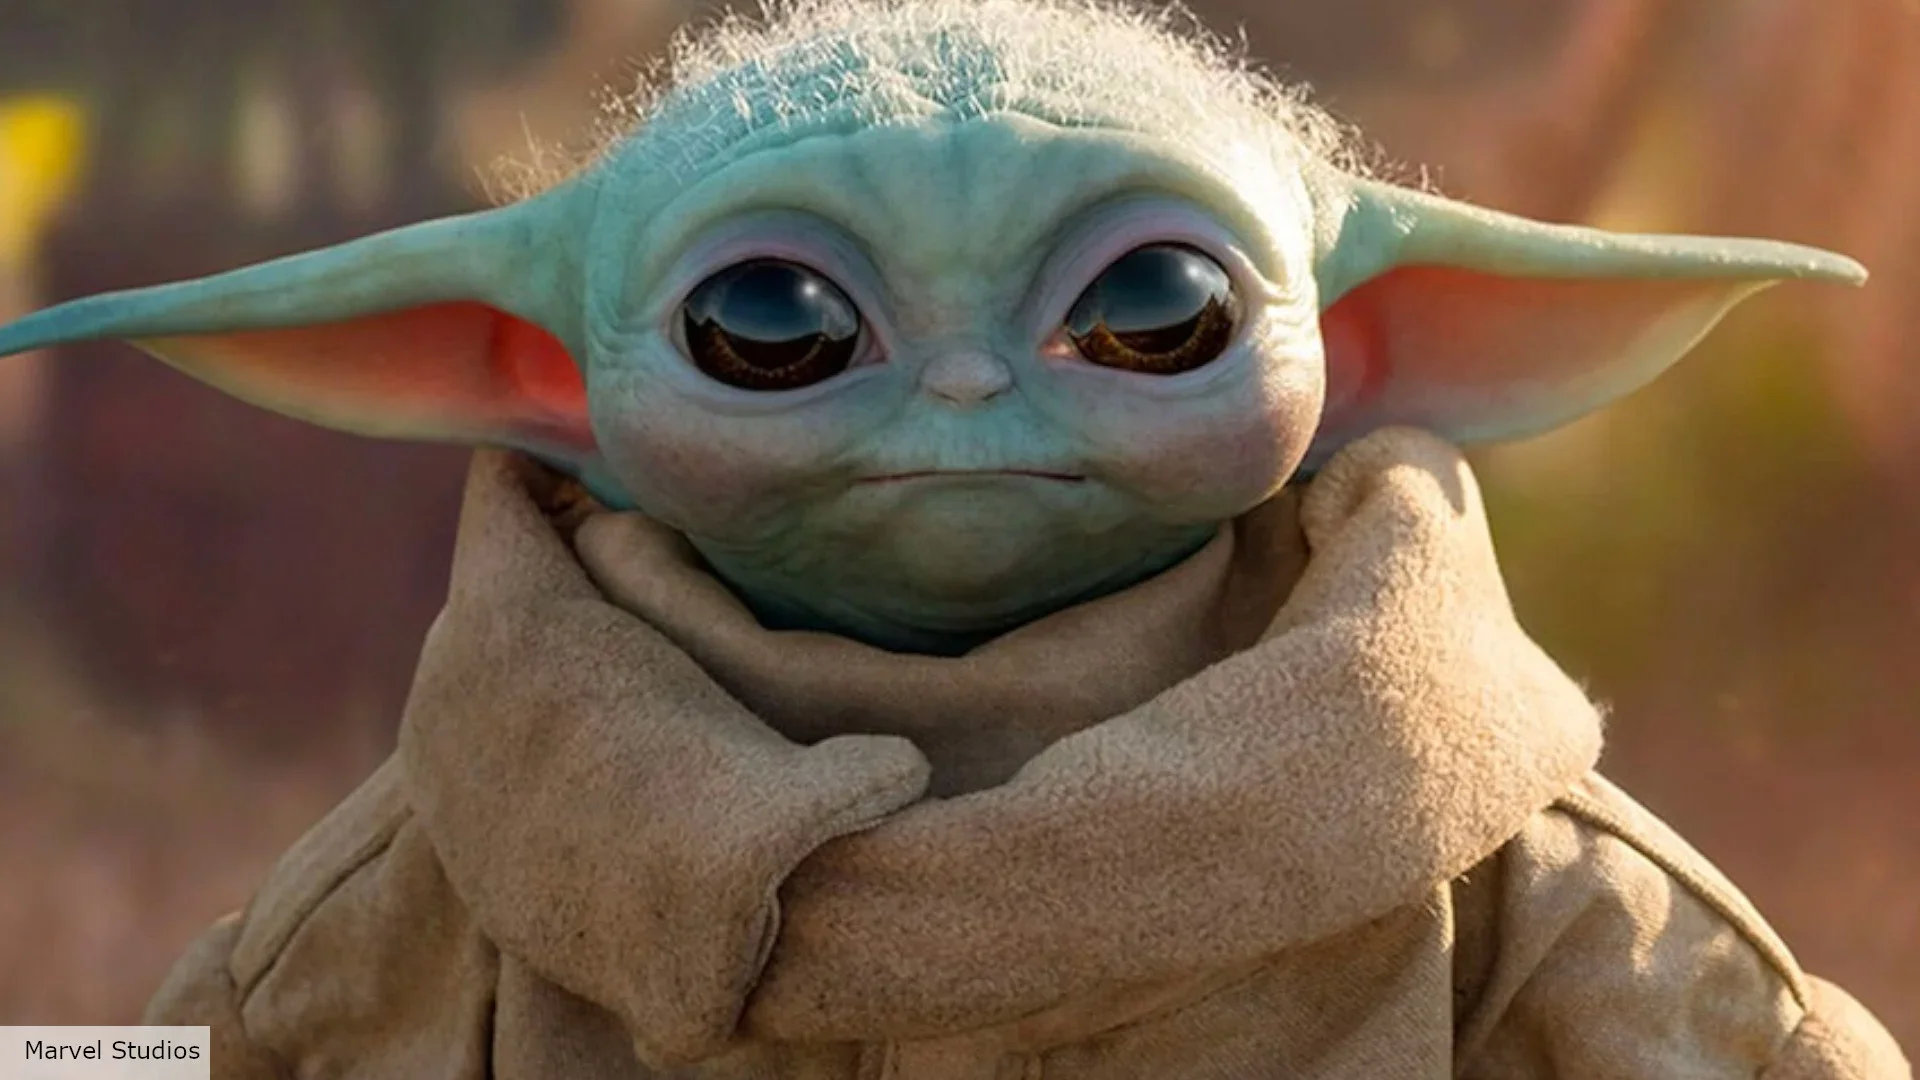 35 cutest Baby Yoda merch and gifts From Star Wars' The Mandalorian |  Popverse